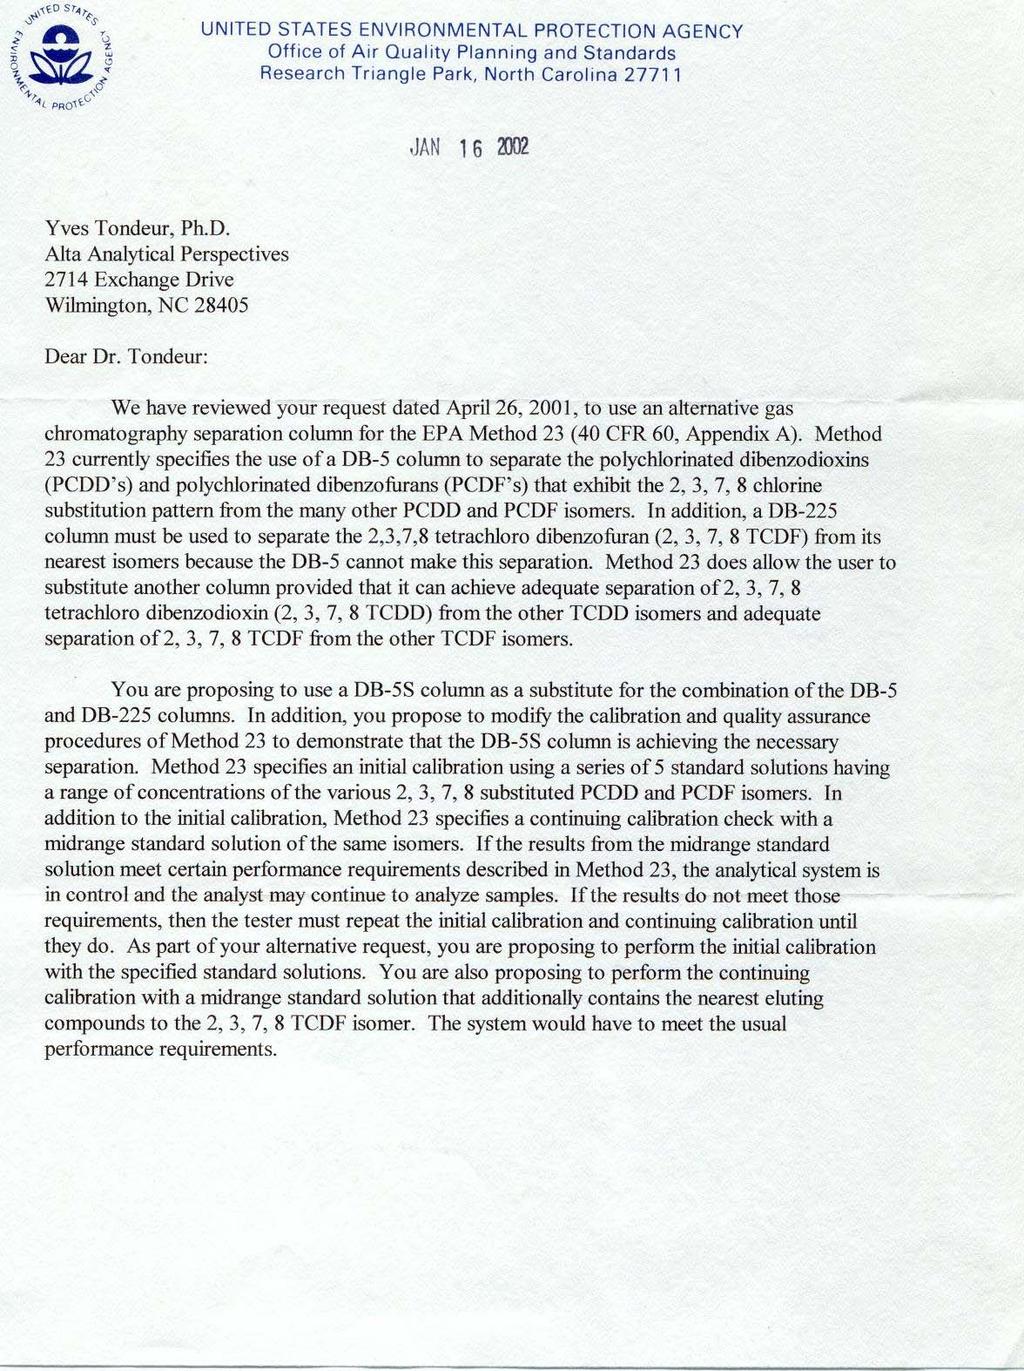 Figure 1: Copy of EPA s Letter approving the